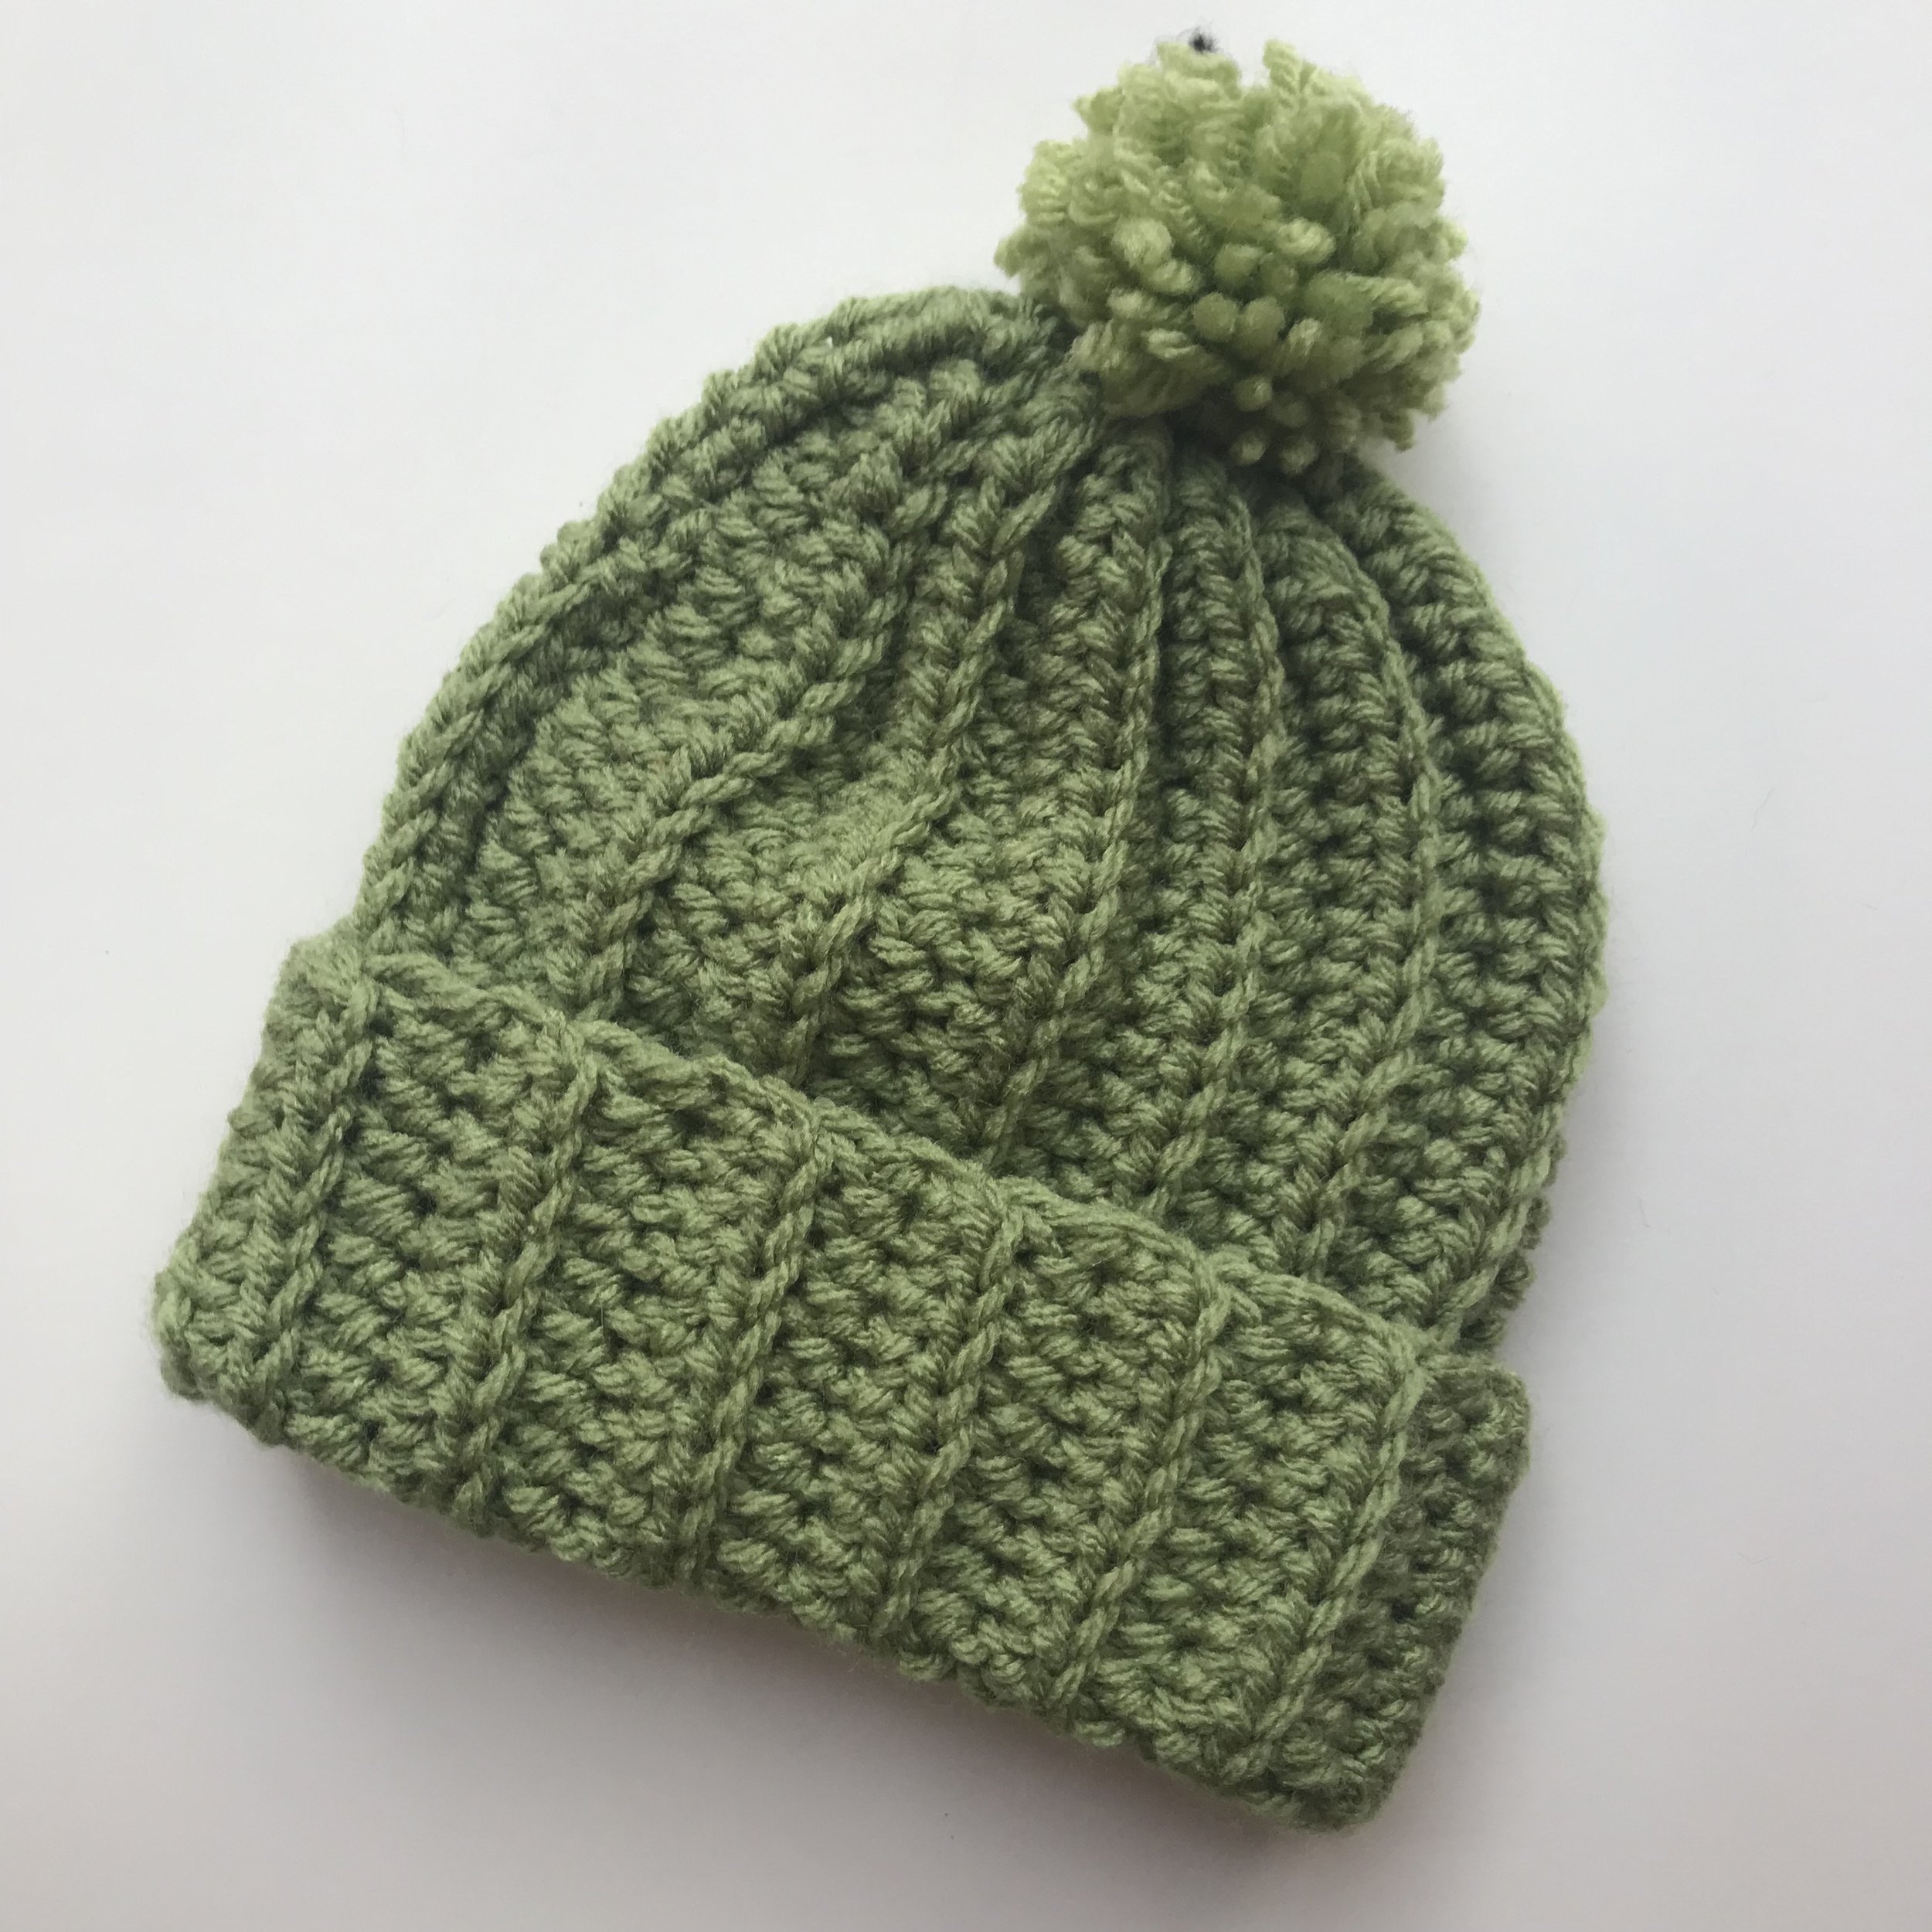 Crochet sage green hat and neck warmer